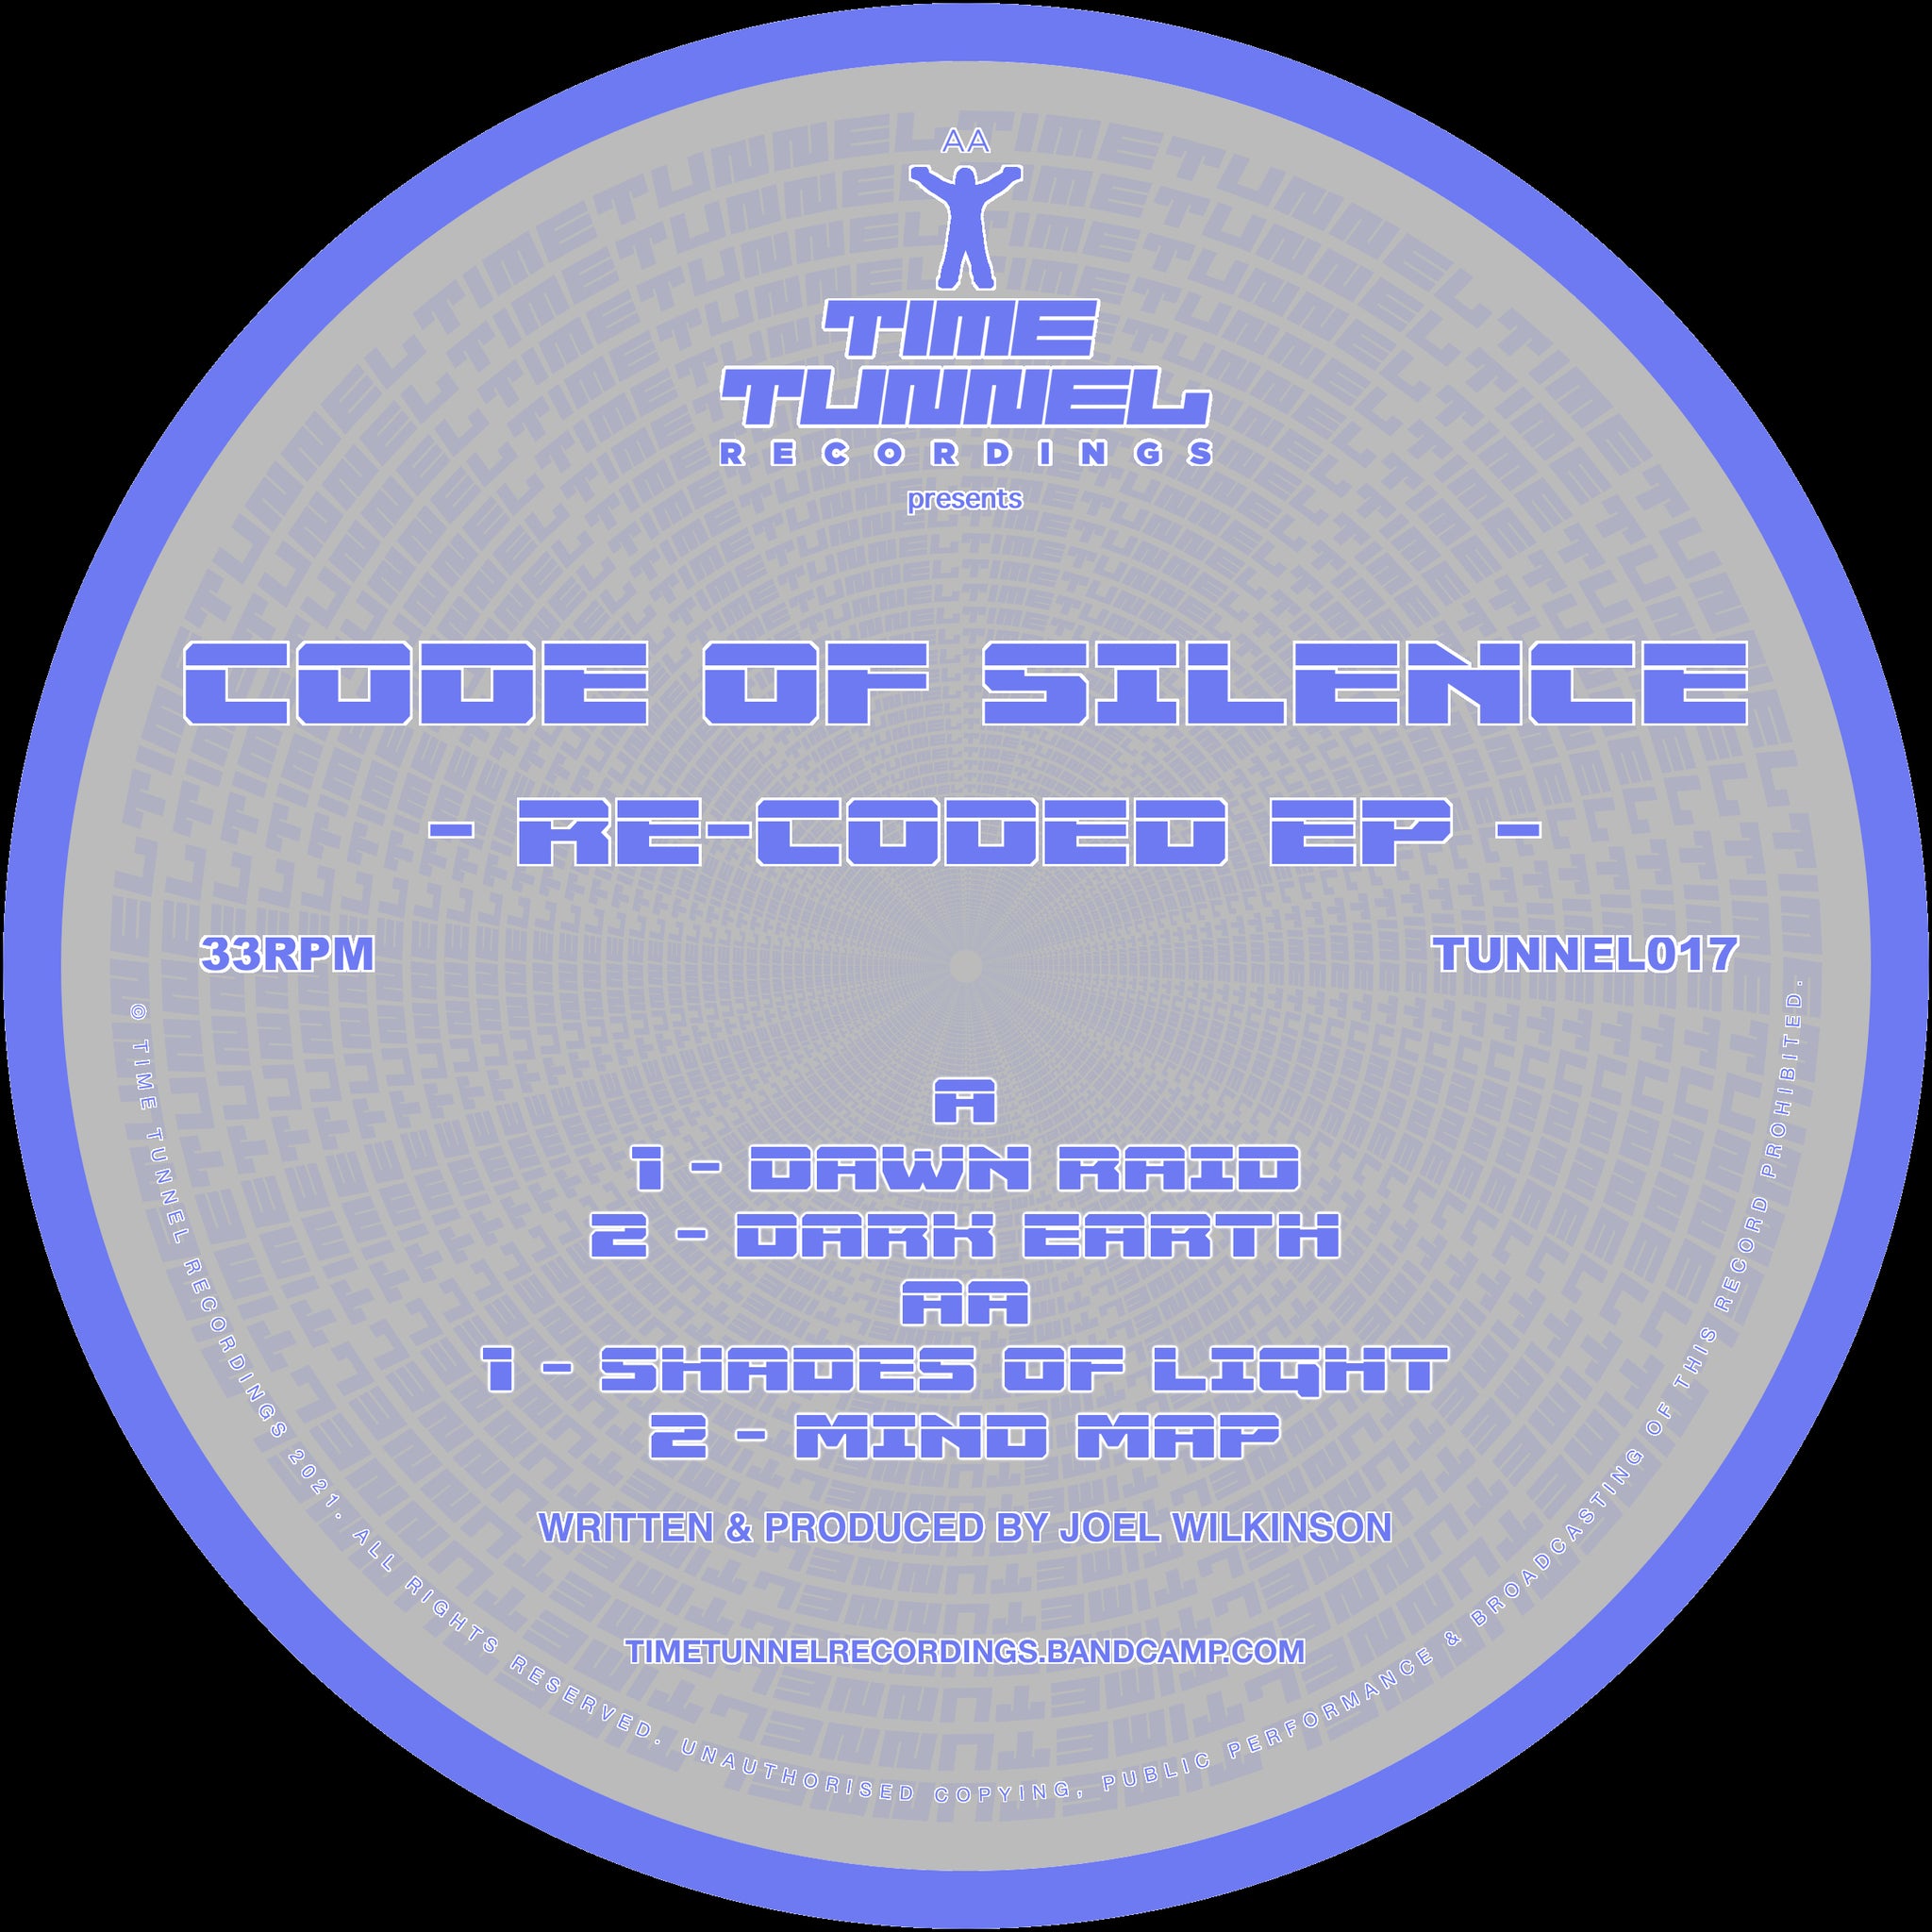 Re-Coded EP